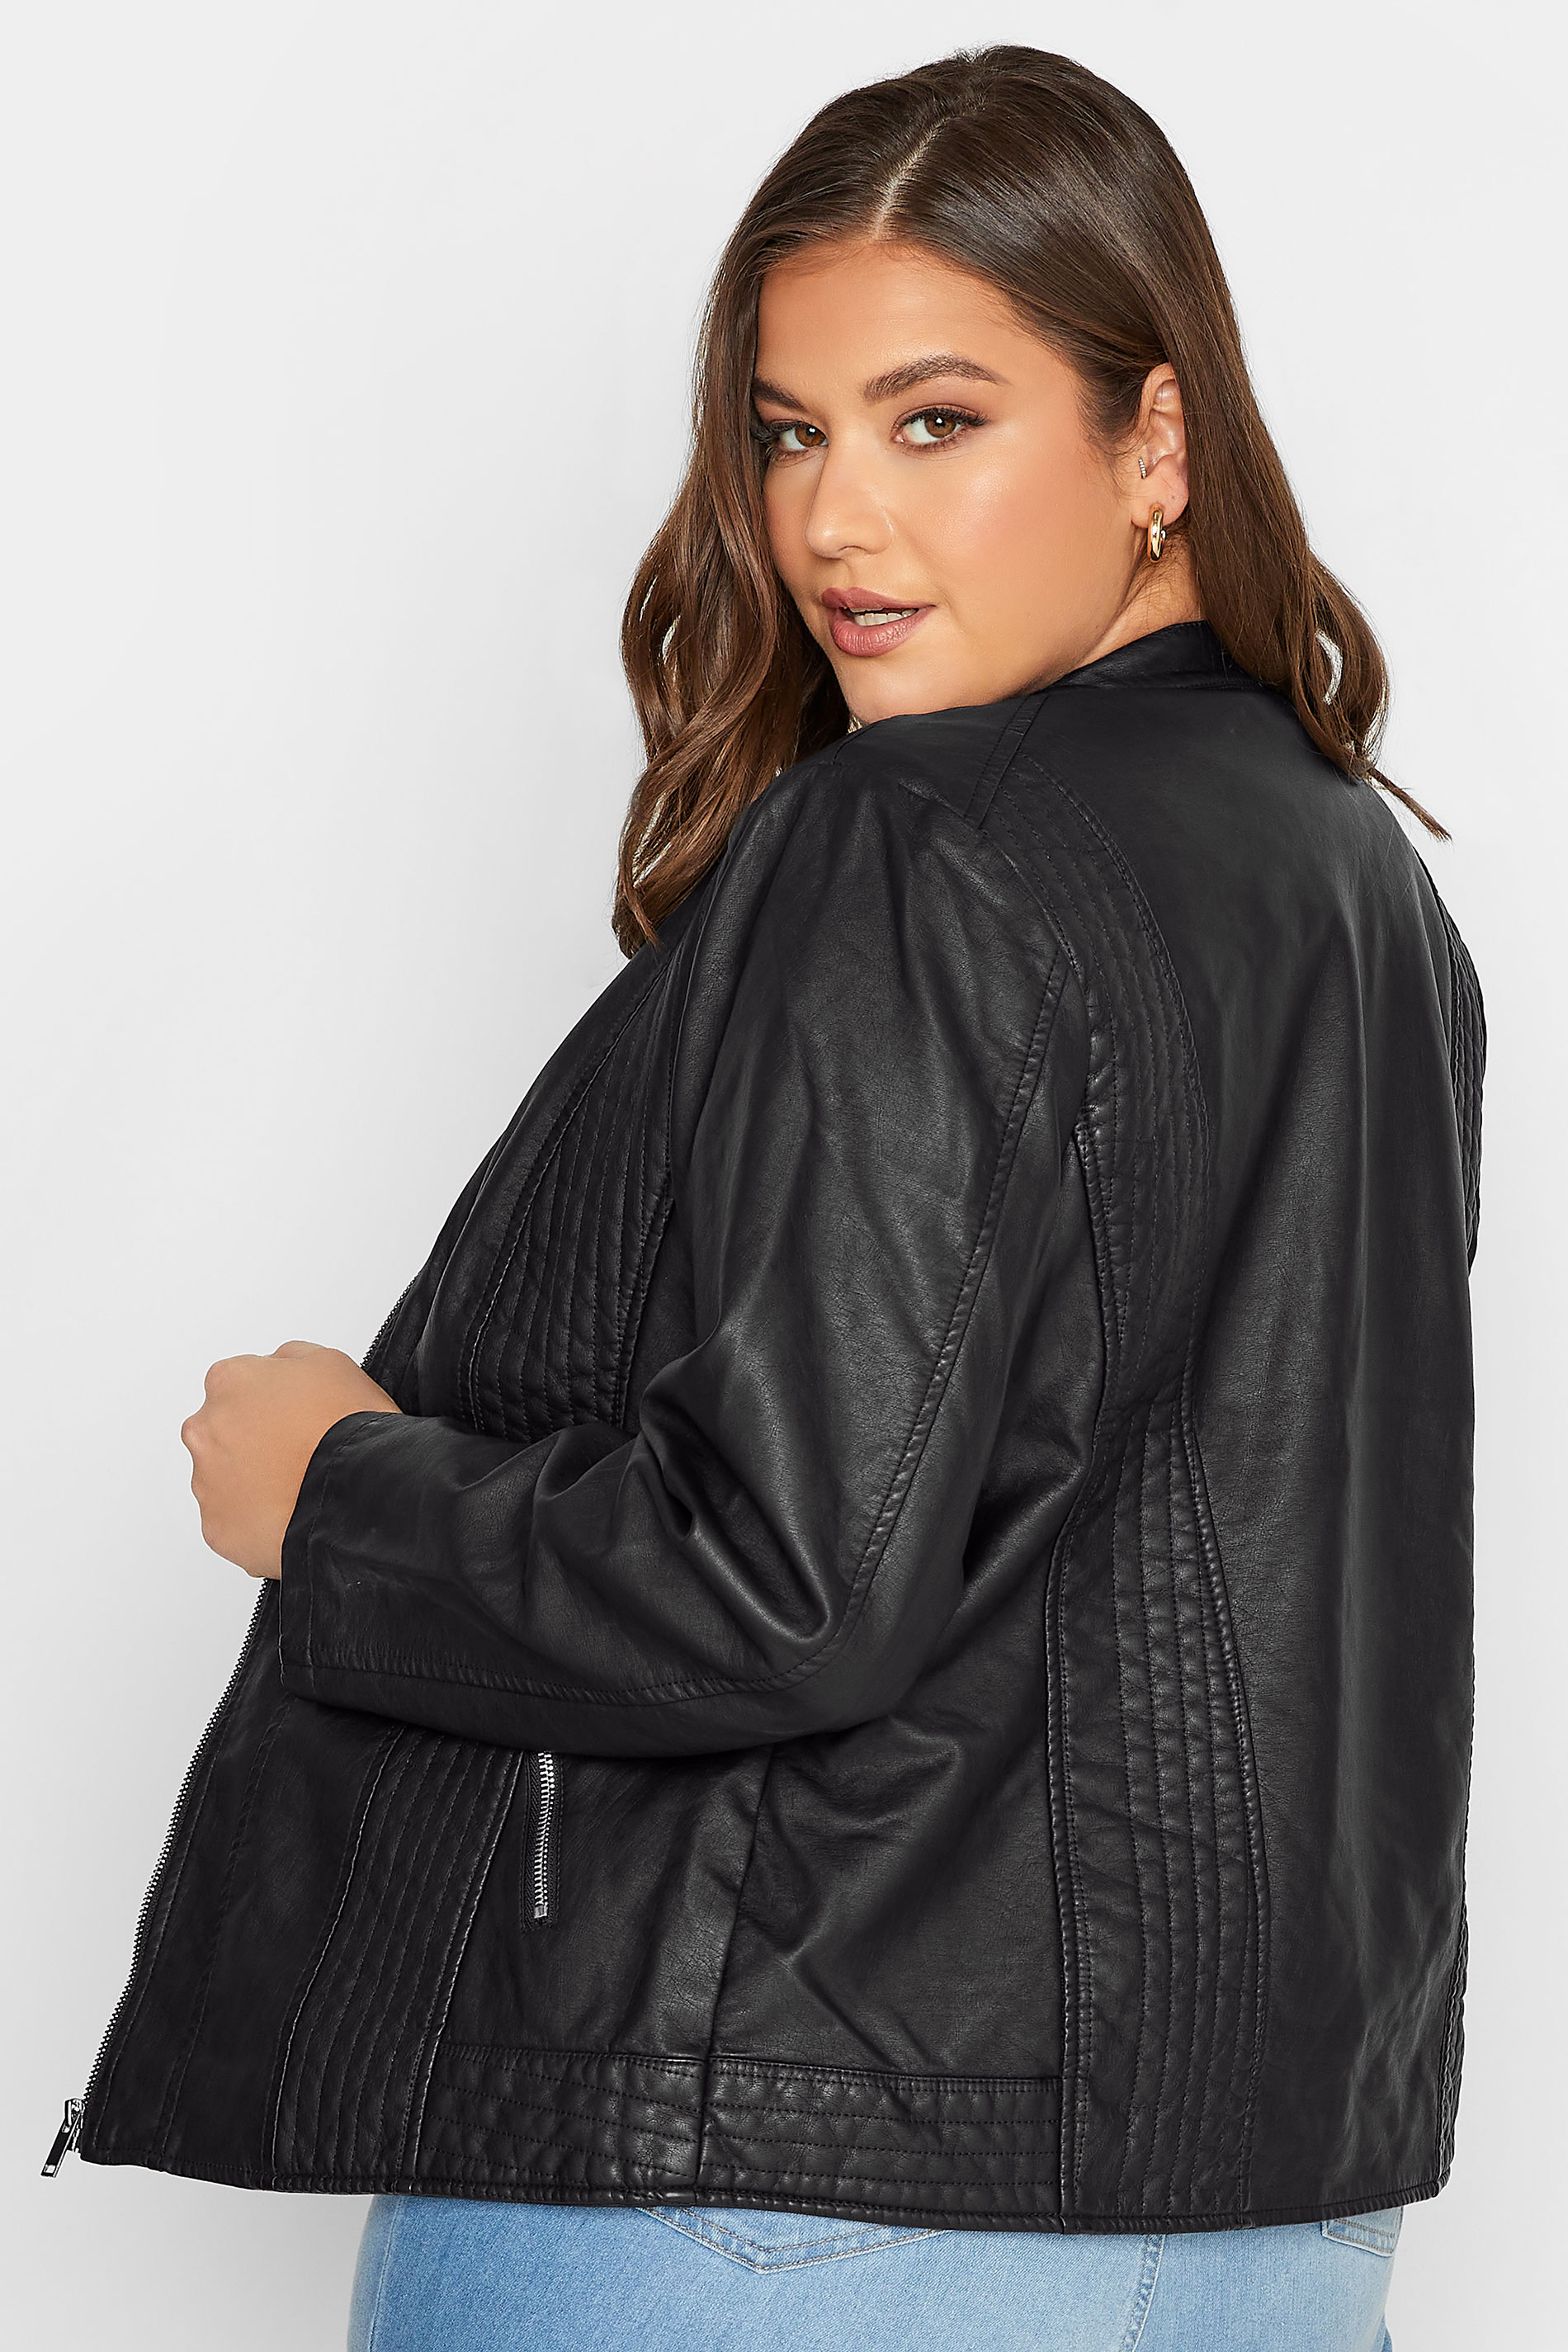 YOURS Plus Size Curve Black Faux Leather Zip Jacket | Yours Clothing  3